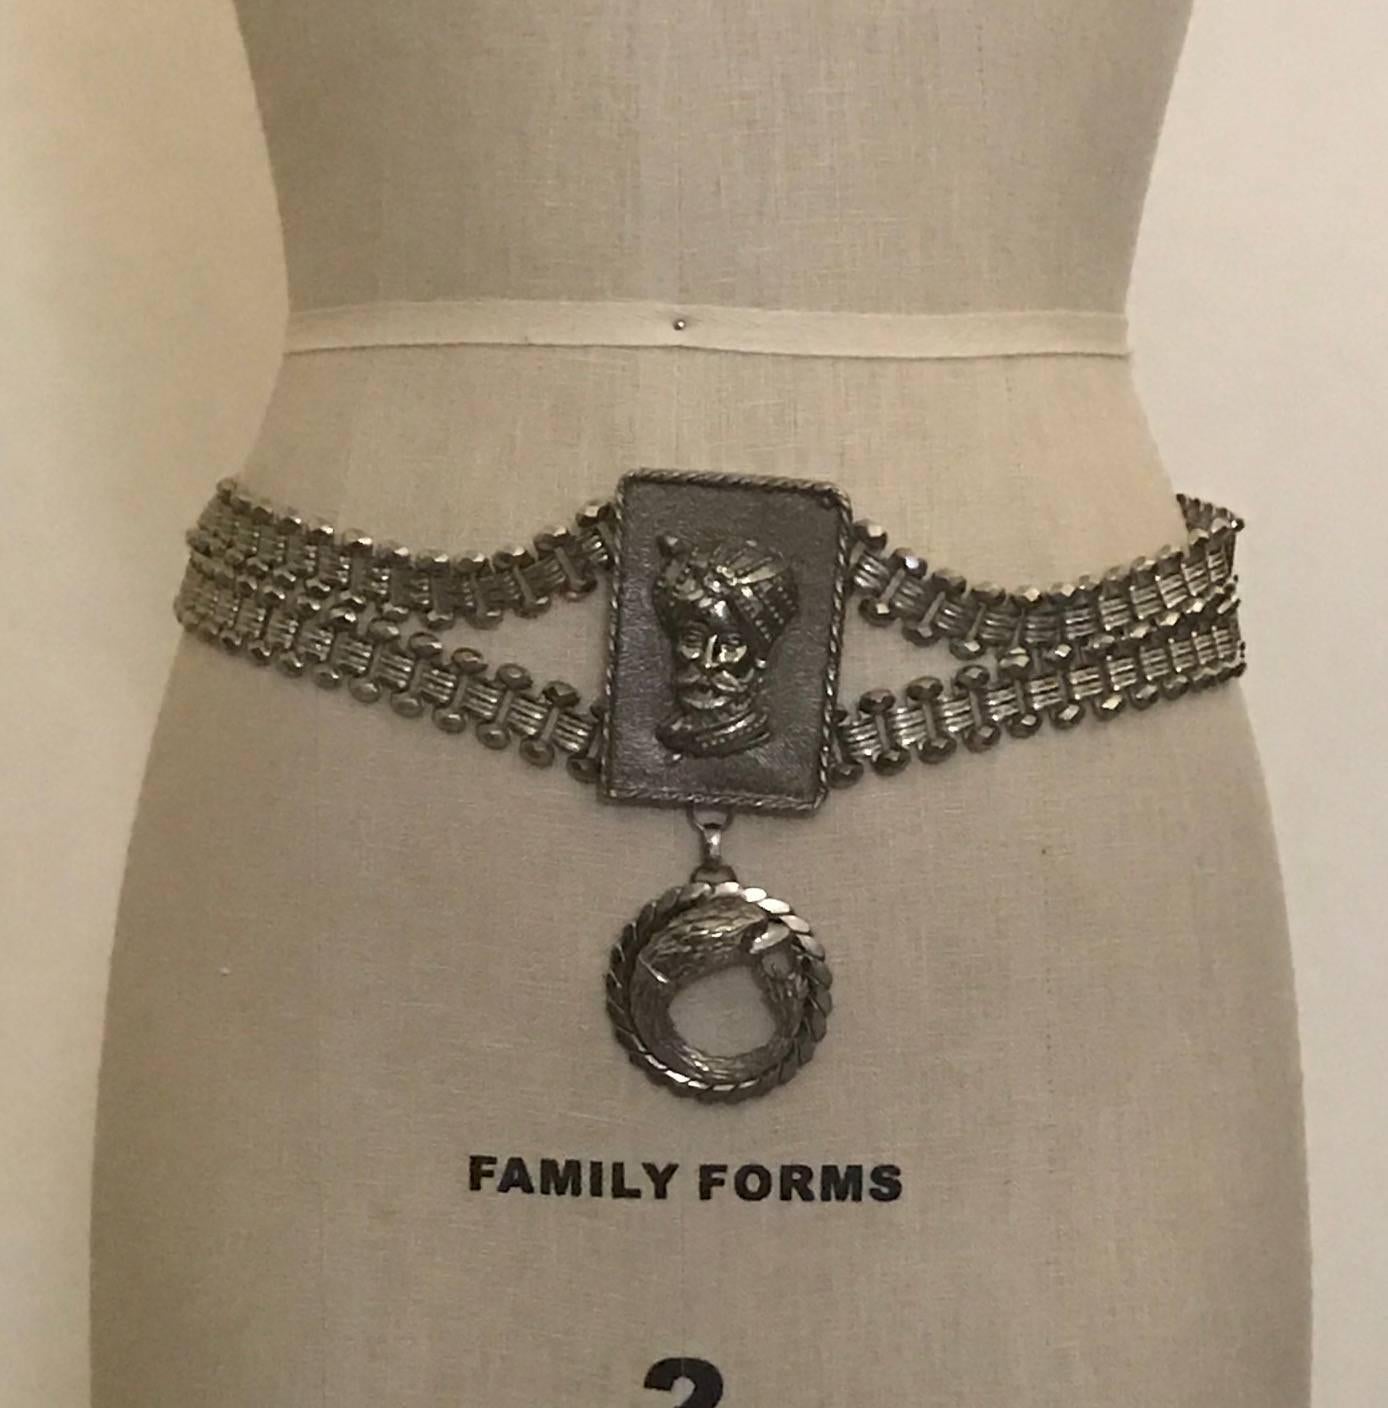 Vintage Christian Dior 1970s (estimated) silver belt featuring a turbaned sultan medallion at front and a hanging snake like creature with an eagle's head. Etched & faceted silver chain. Fastens with hook at side.

Signed 'Christian Dior' at